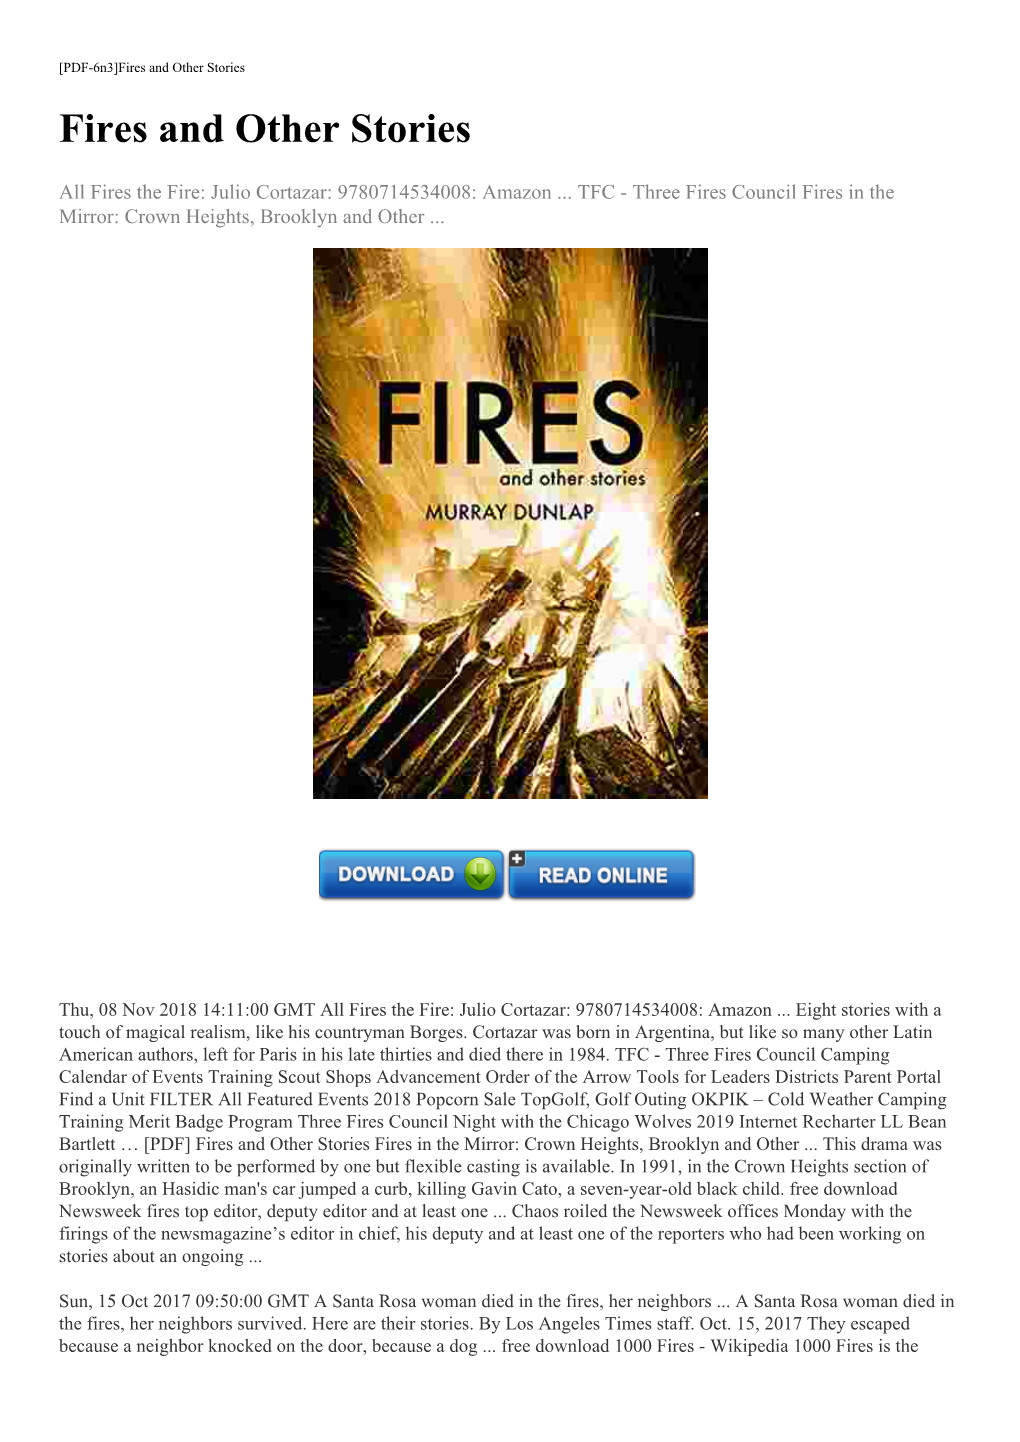 [PDF] Fires and Other Stories Fires in the Mirror: Crown Heights, Brooklyn and Other